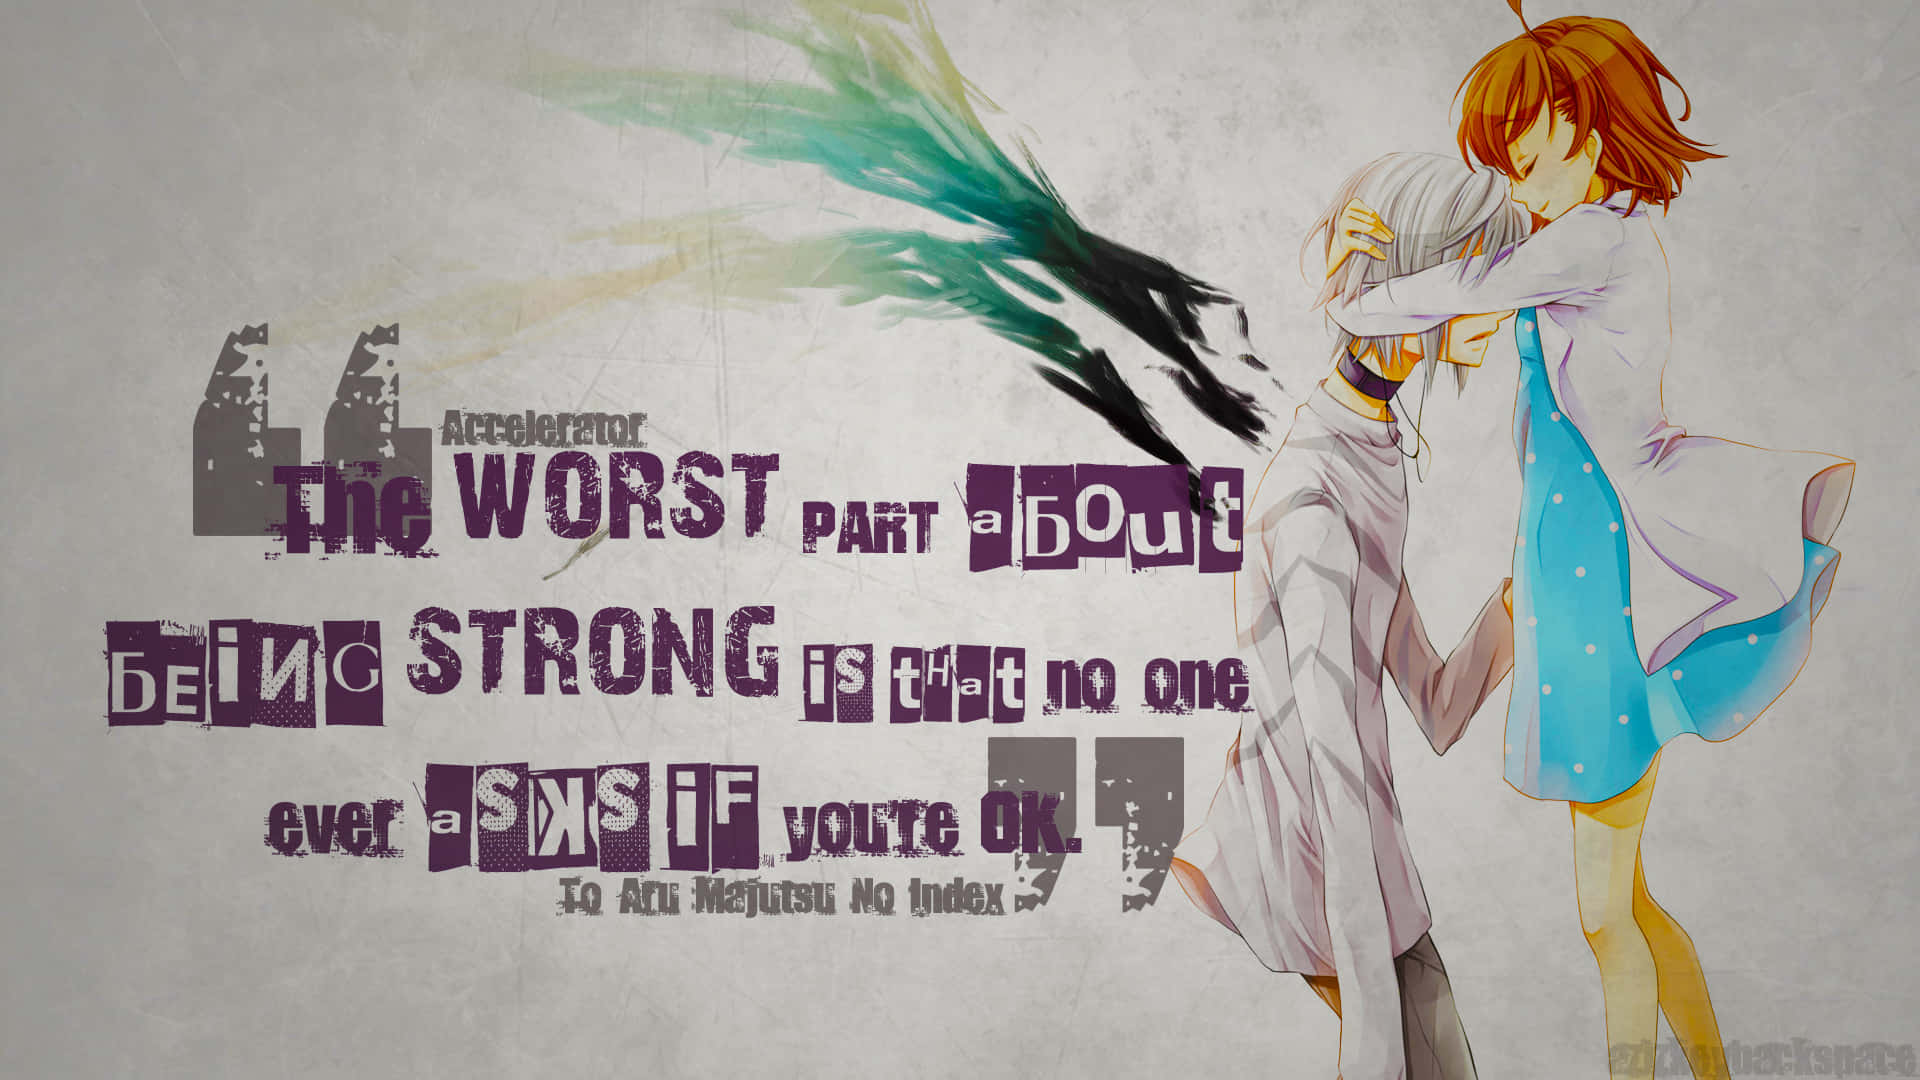 "You must be strong and keep moving forward, even when your heart is weighed down by sadness." Wallpaper